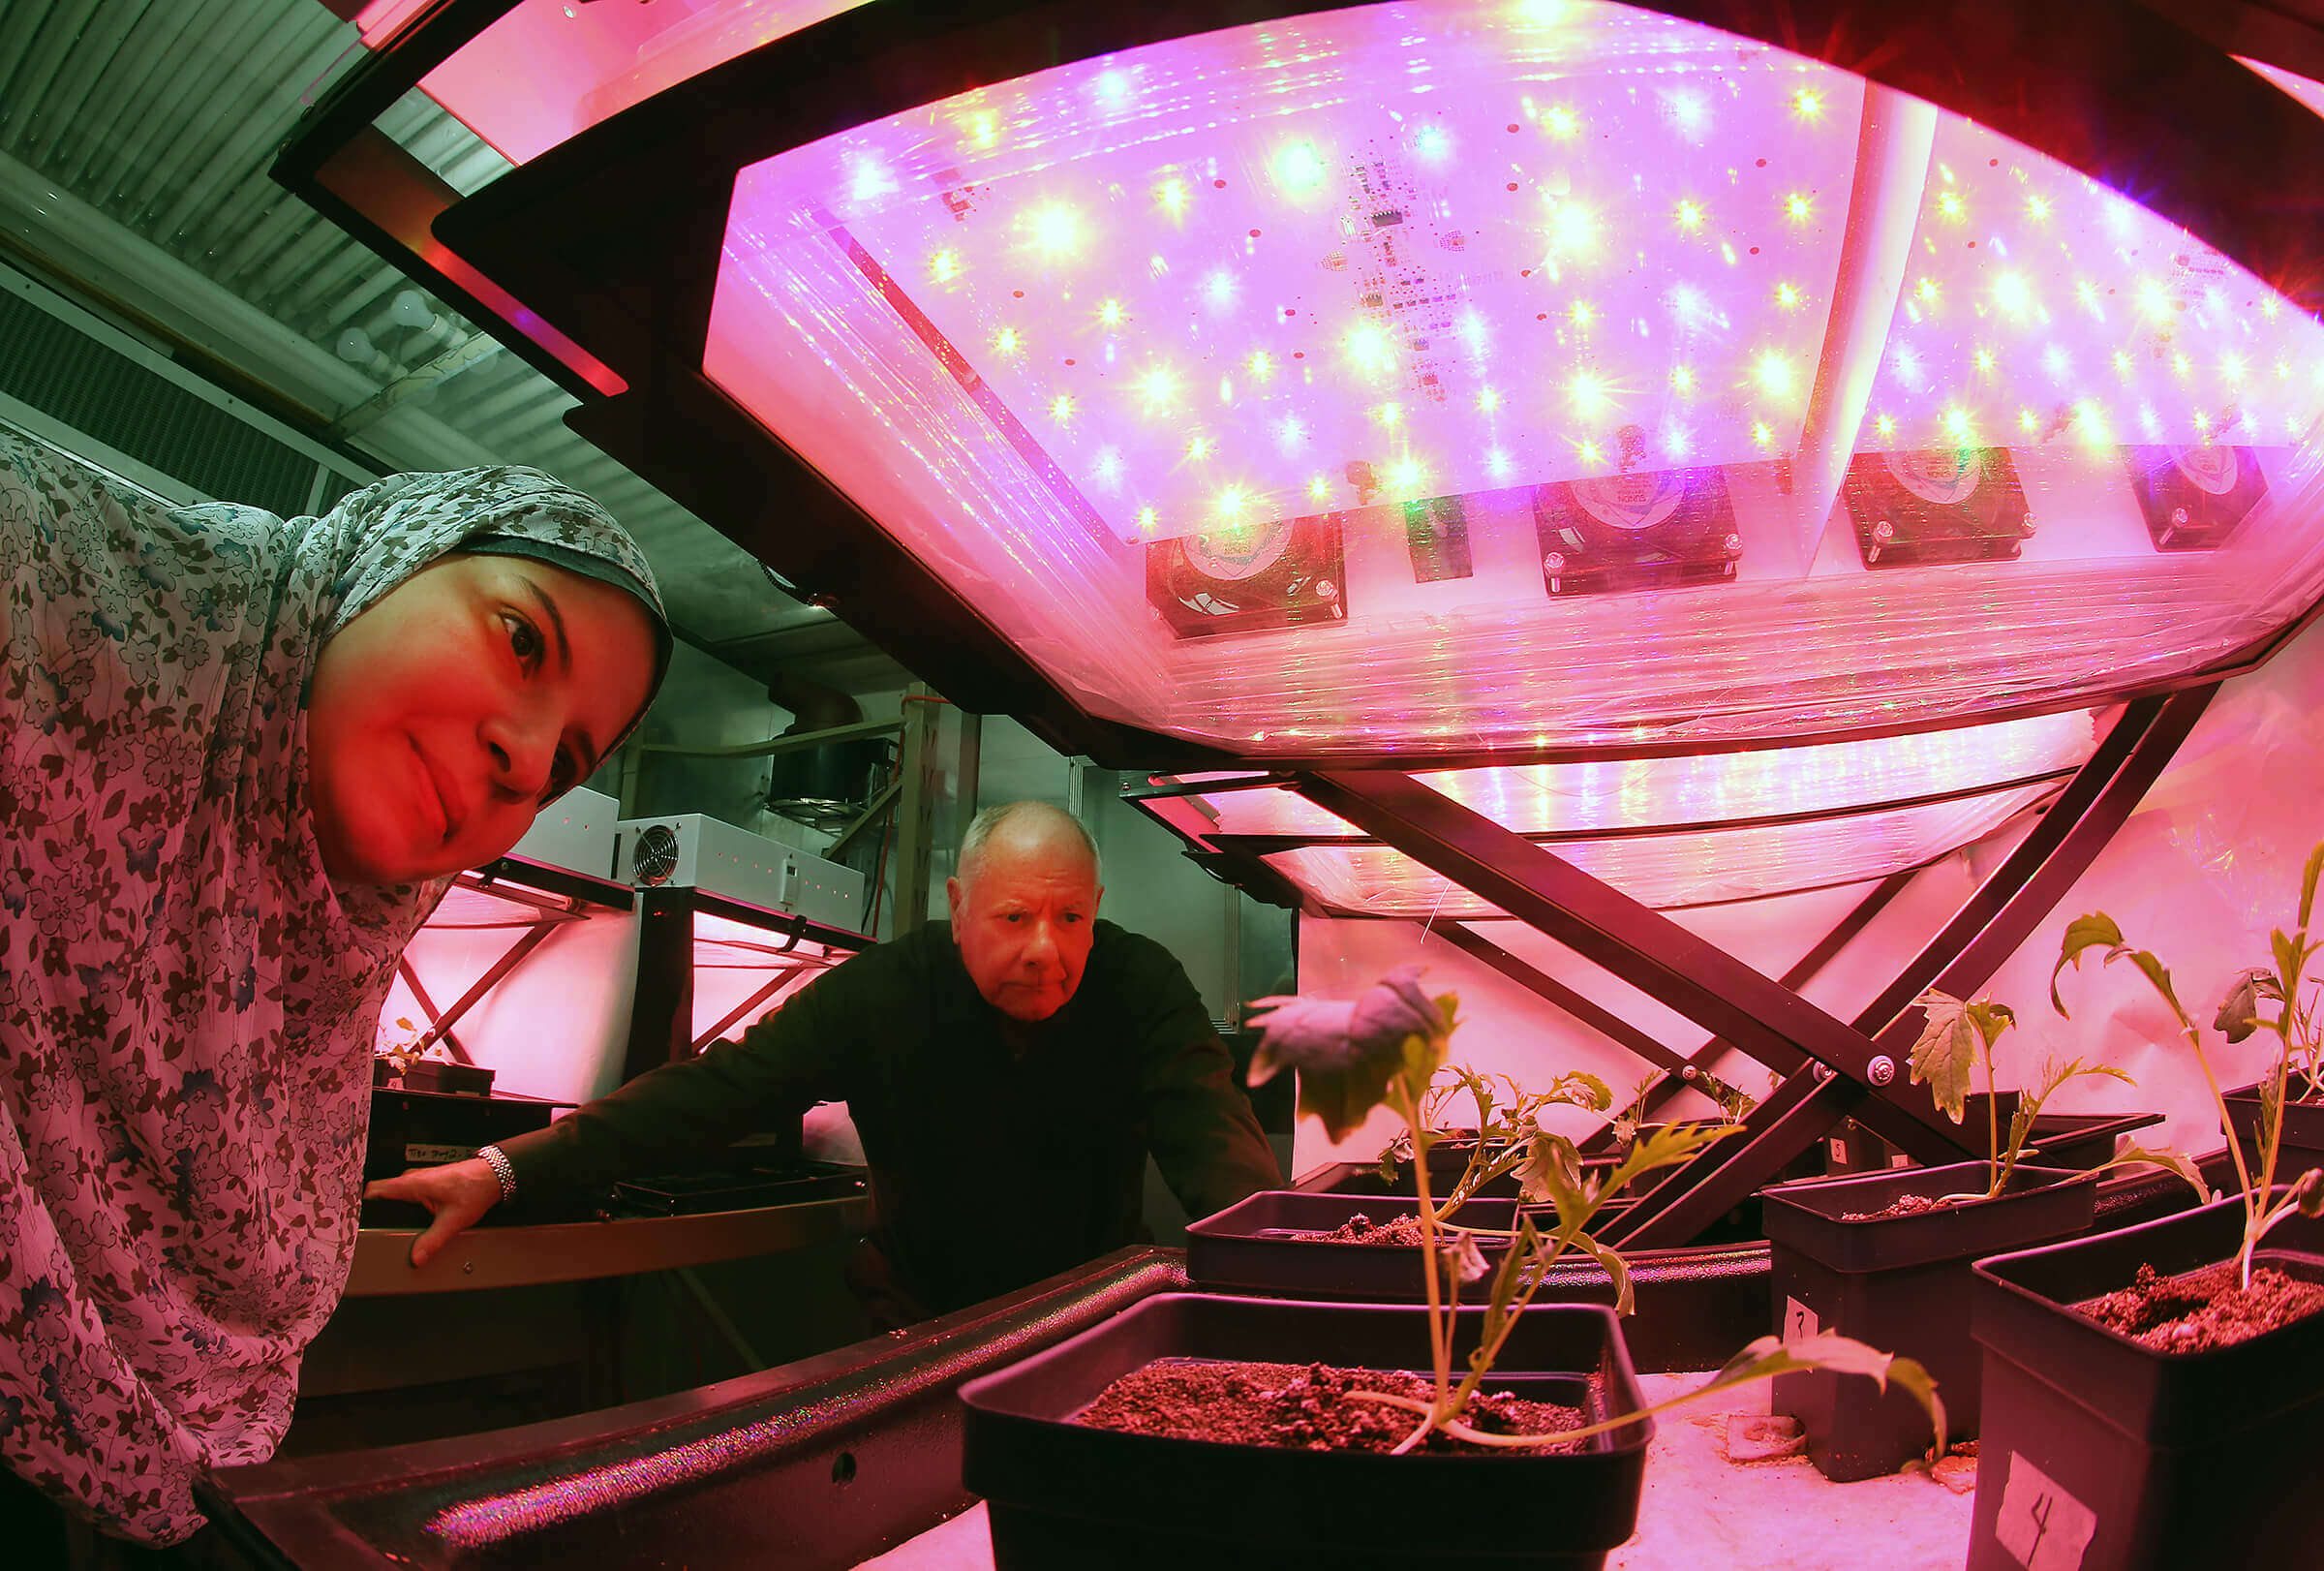 Cary Mitchell and his graduate student, Asmaa Morsi, monitor the growth of mizuna plants (much like arugula) in a growth chamber on the Purdue University campus. (Purdue University photo by Tom Campbell)